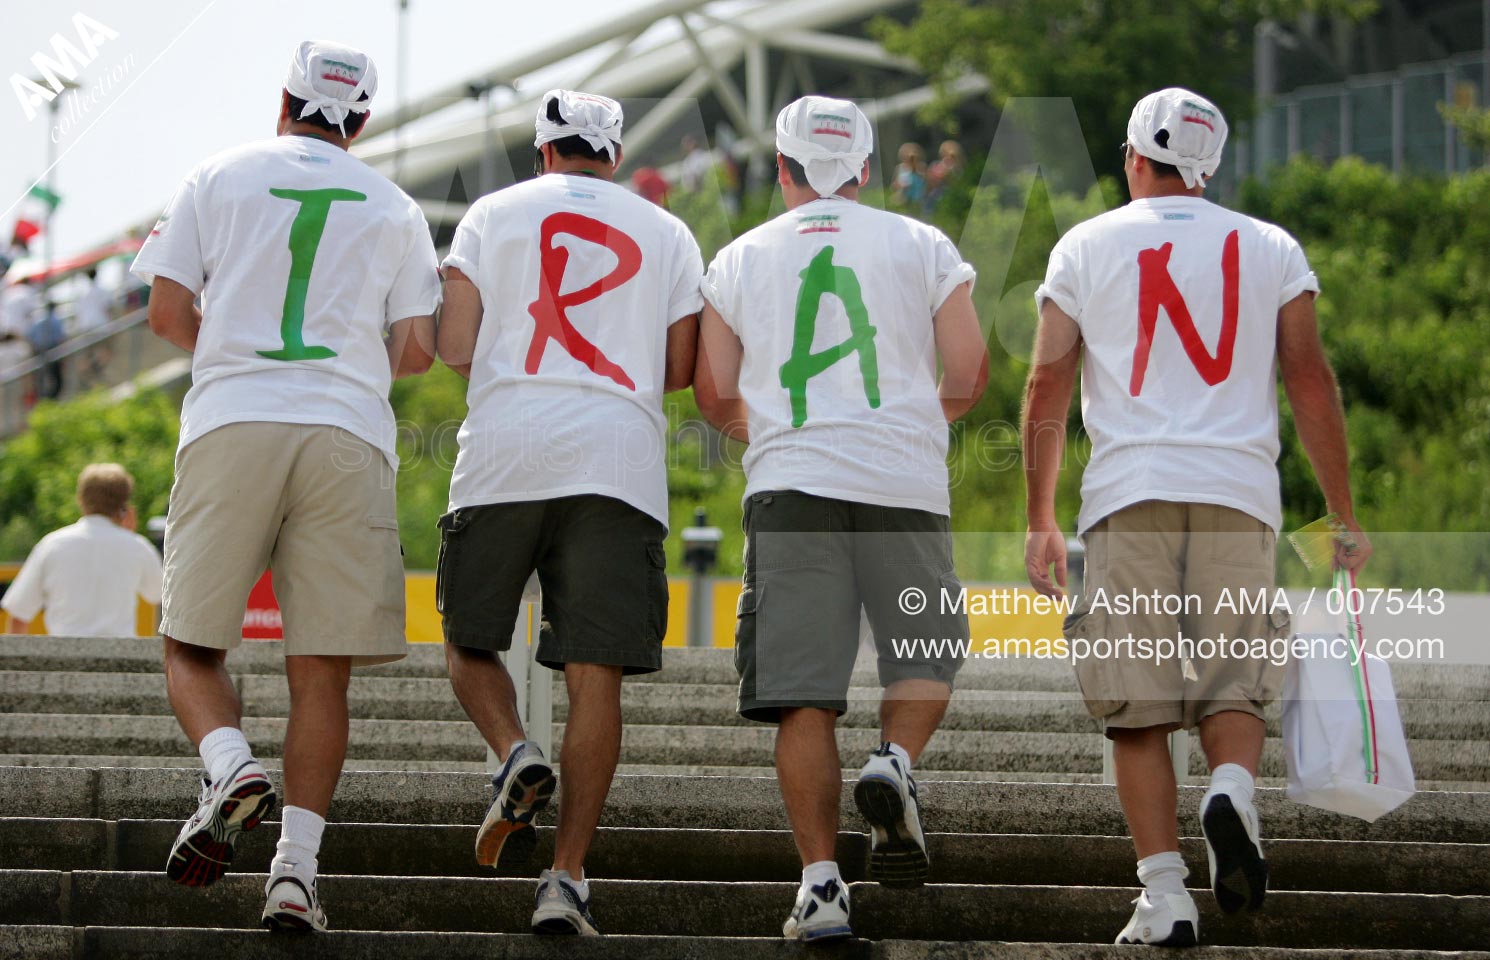 21 June 2006 - FIFA World Cup 2006 - Group D - Iran v Angola - Iran fans walk to the stadium in Leipzig